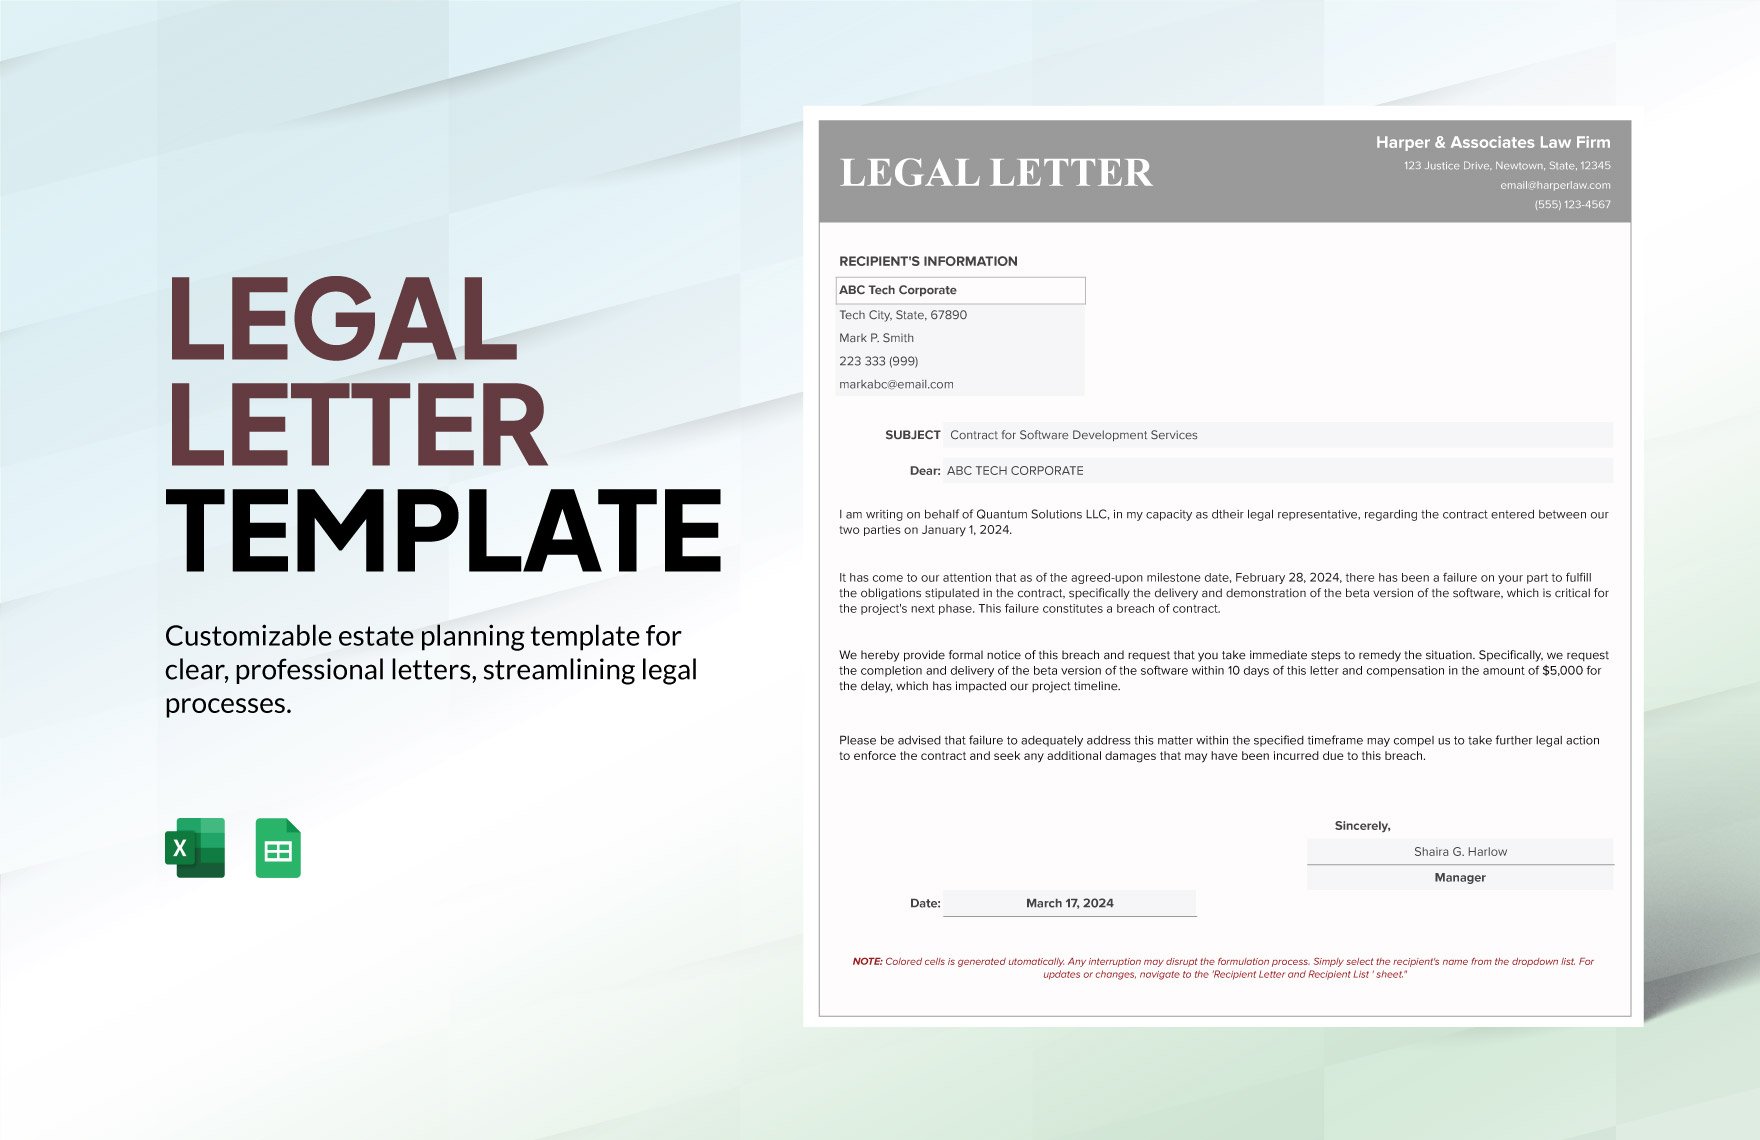 Legal Letter Template in Excel, Google Sheets